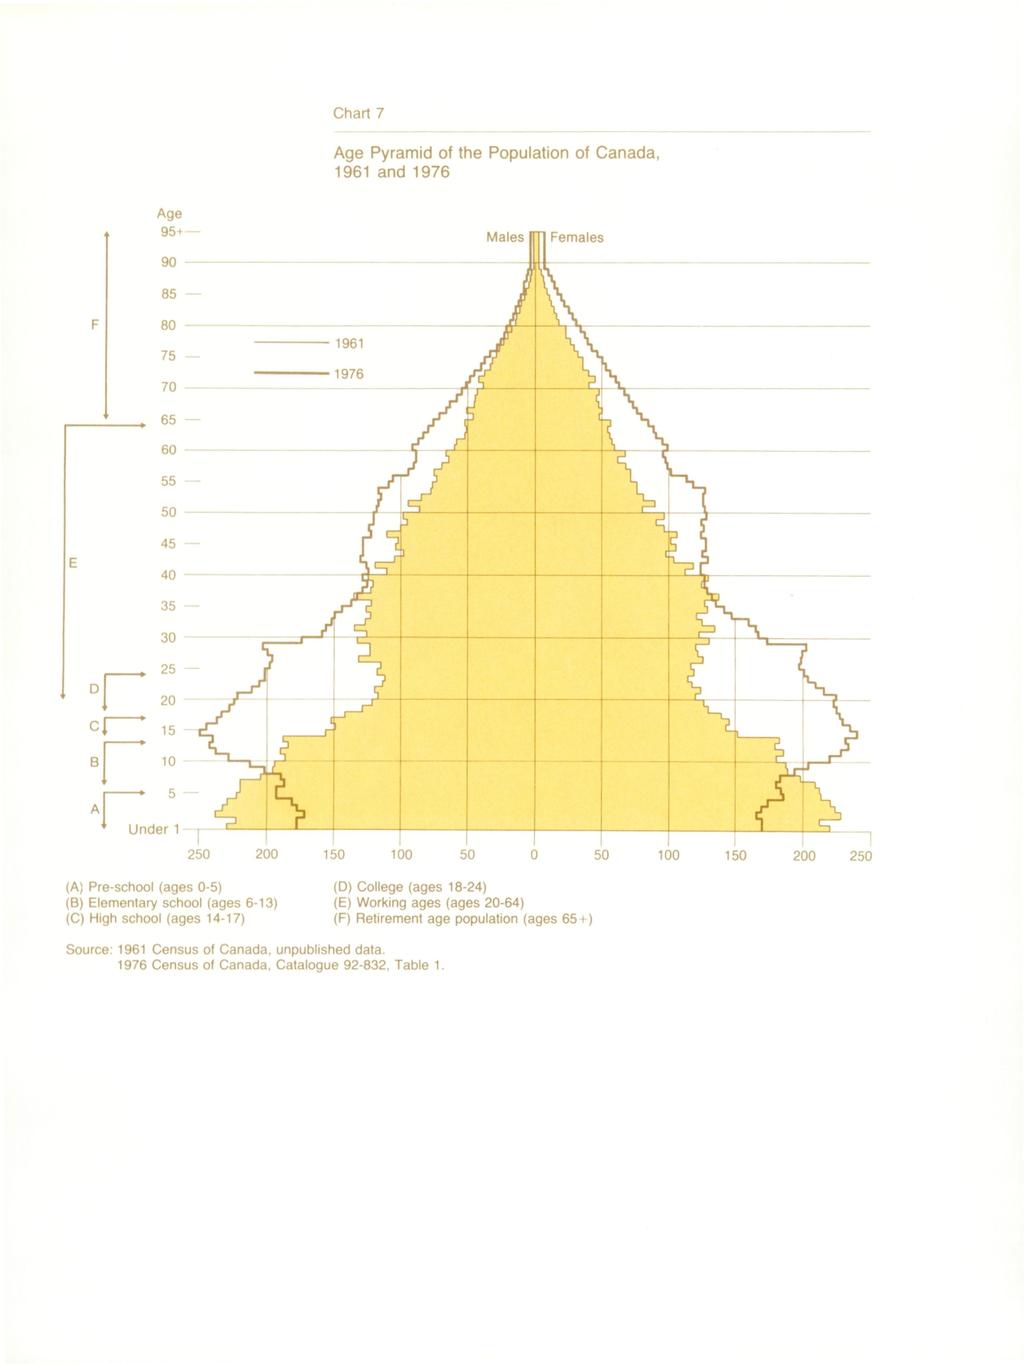 Chart 7 Age Pyramid of the Population of Canada, 1961 and 1976 (A) Pre-school (ages 0-5) (B) Elementary school (ages 6-13) (C) High school (ages 14-17) (D) College (ages